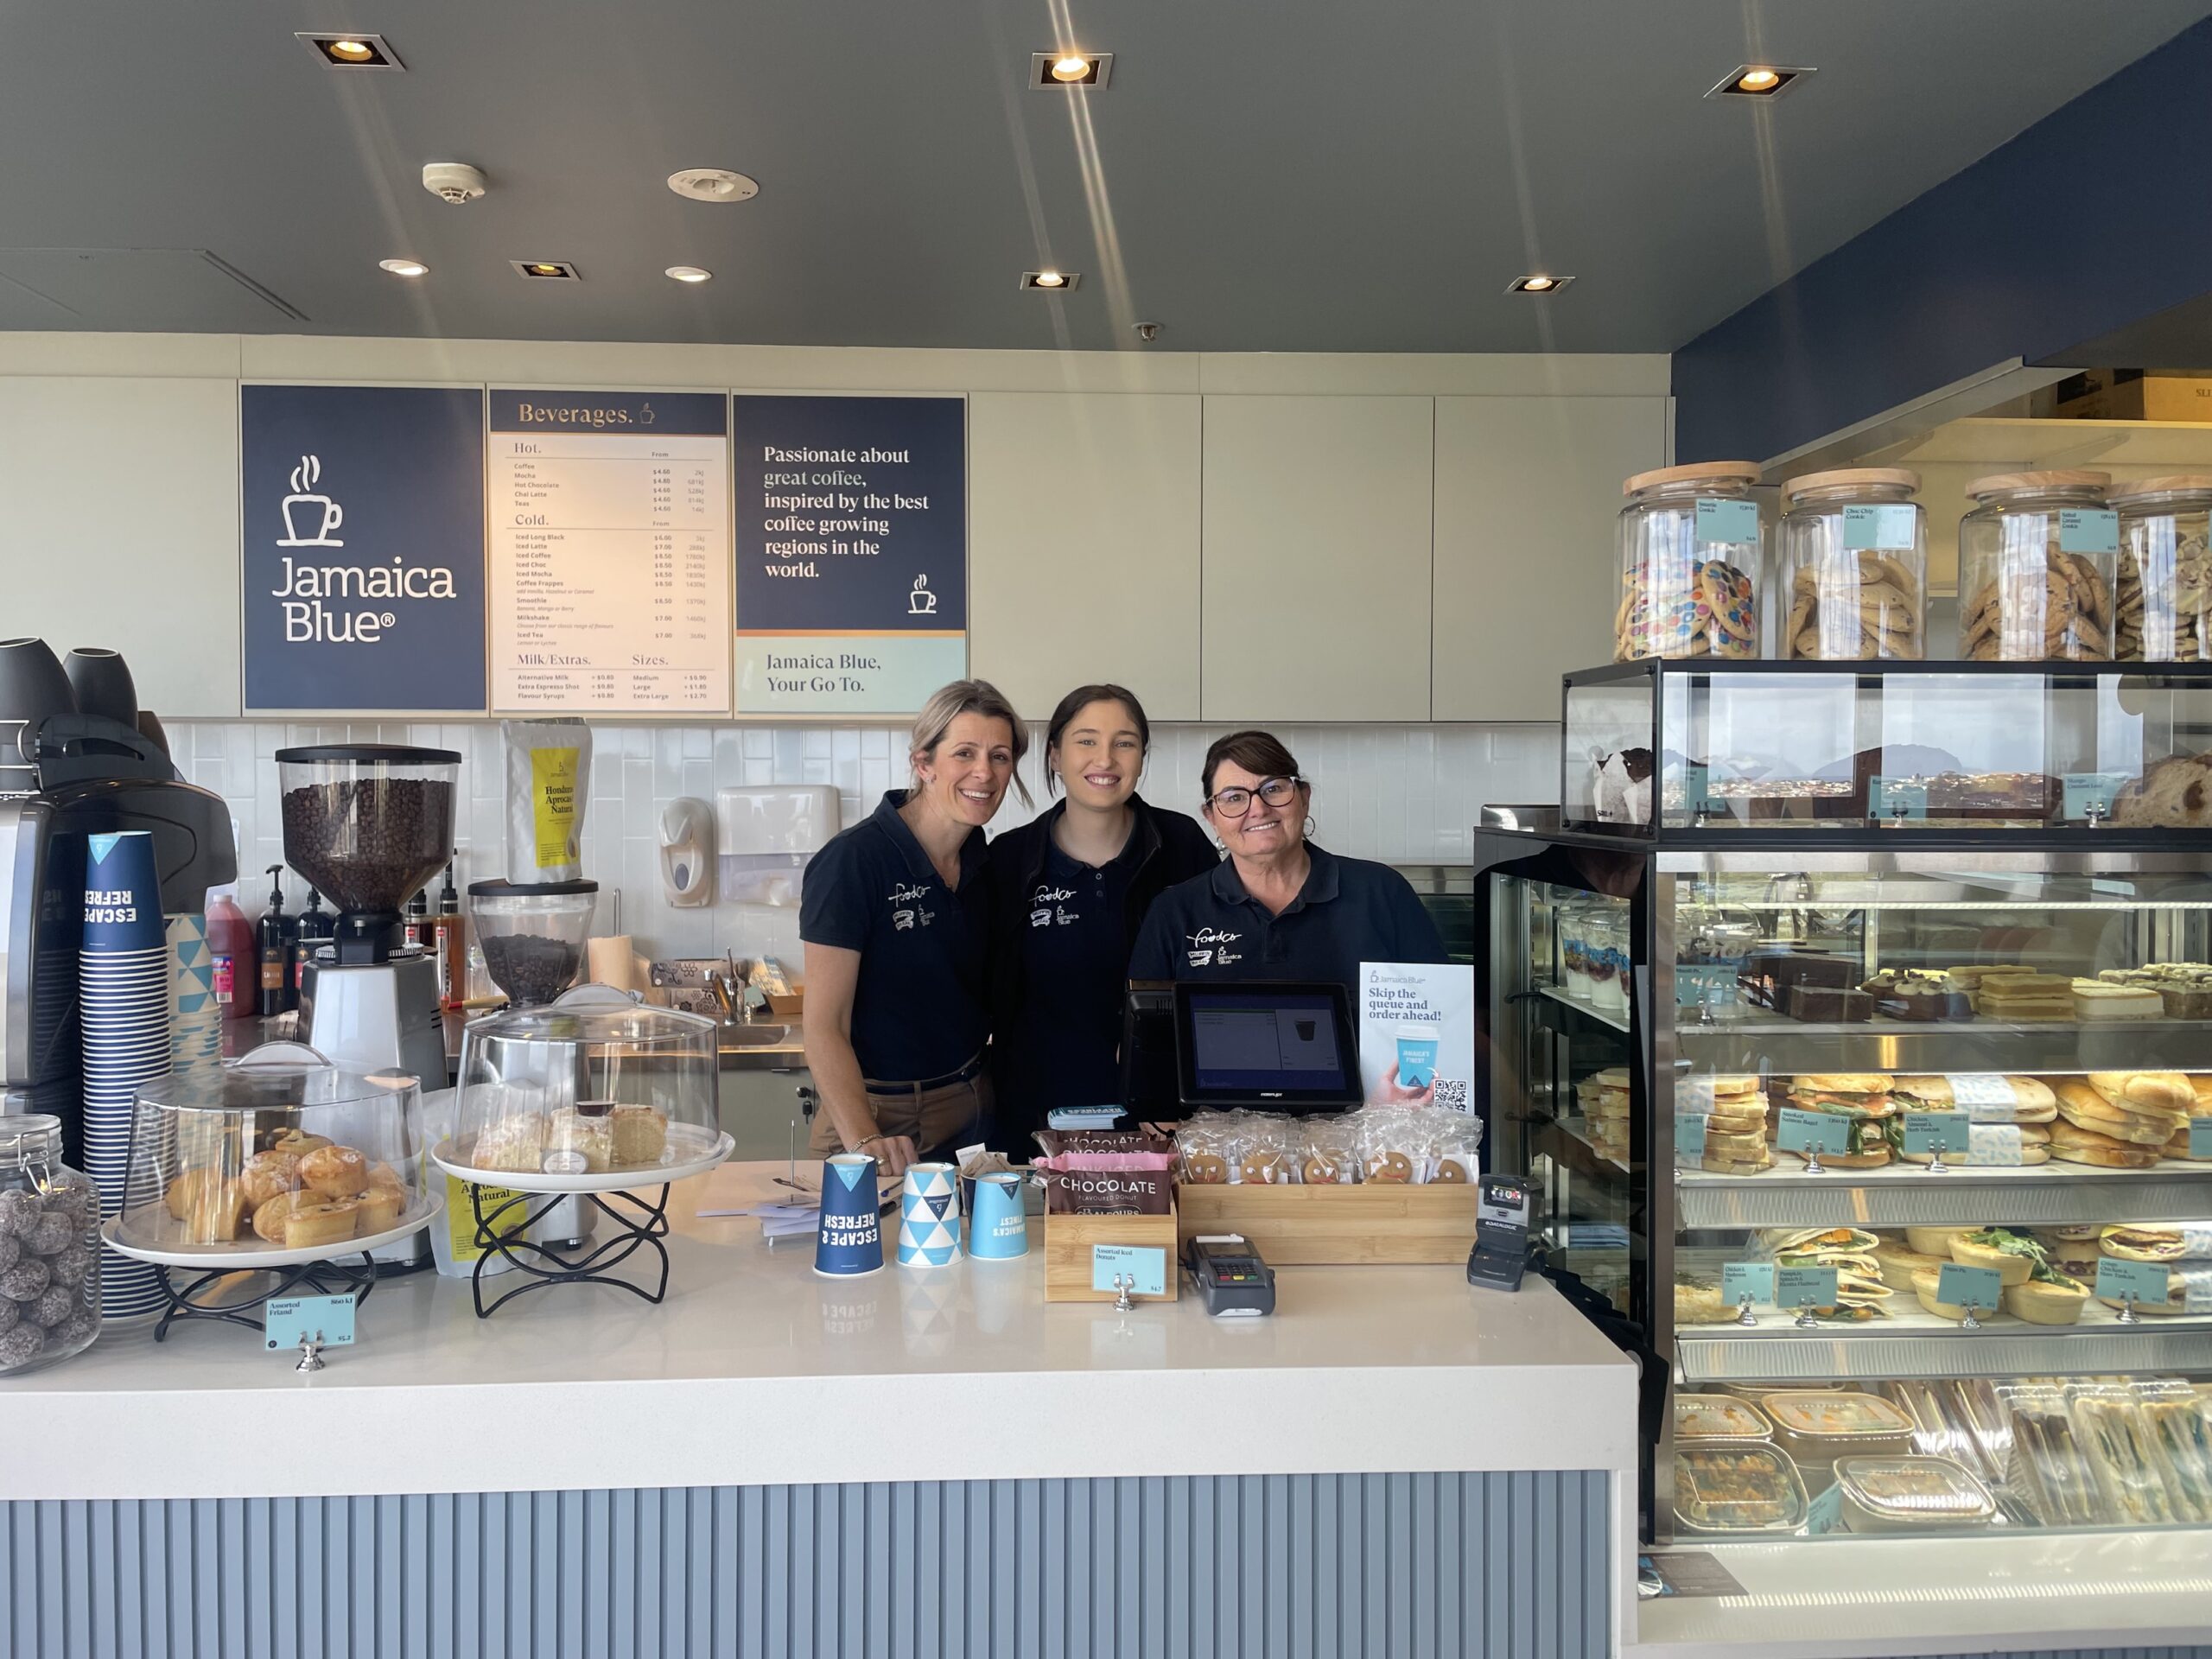 Our latest Jamaica Blue café is now open at Prince of Wales Private Hospital, Randwick!